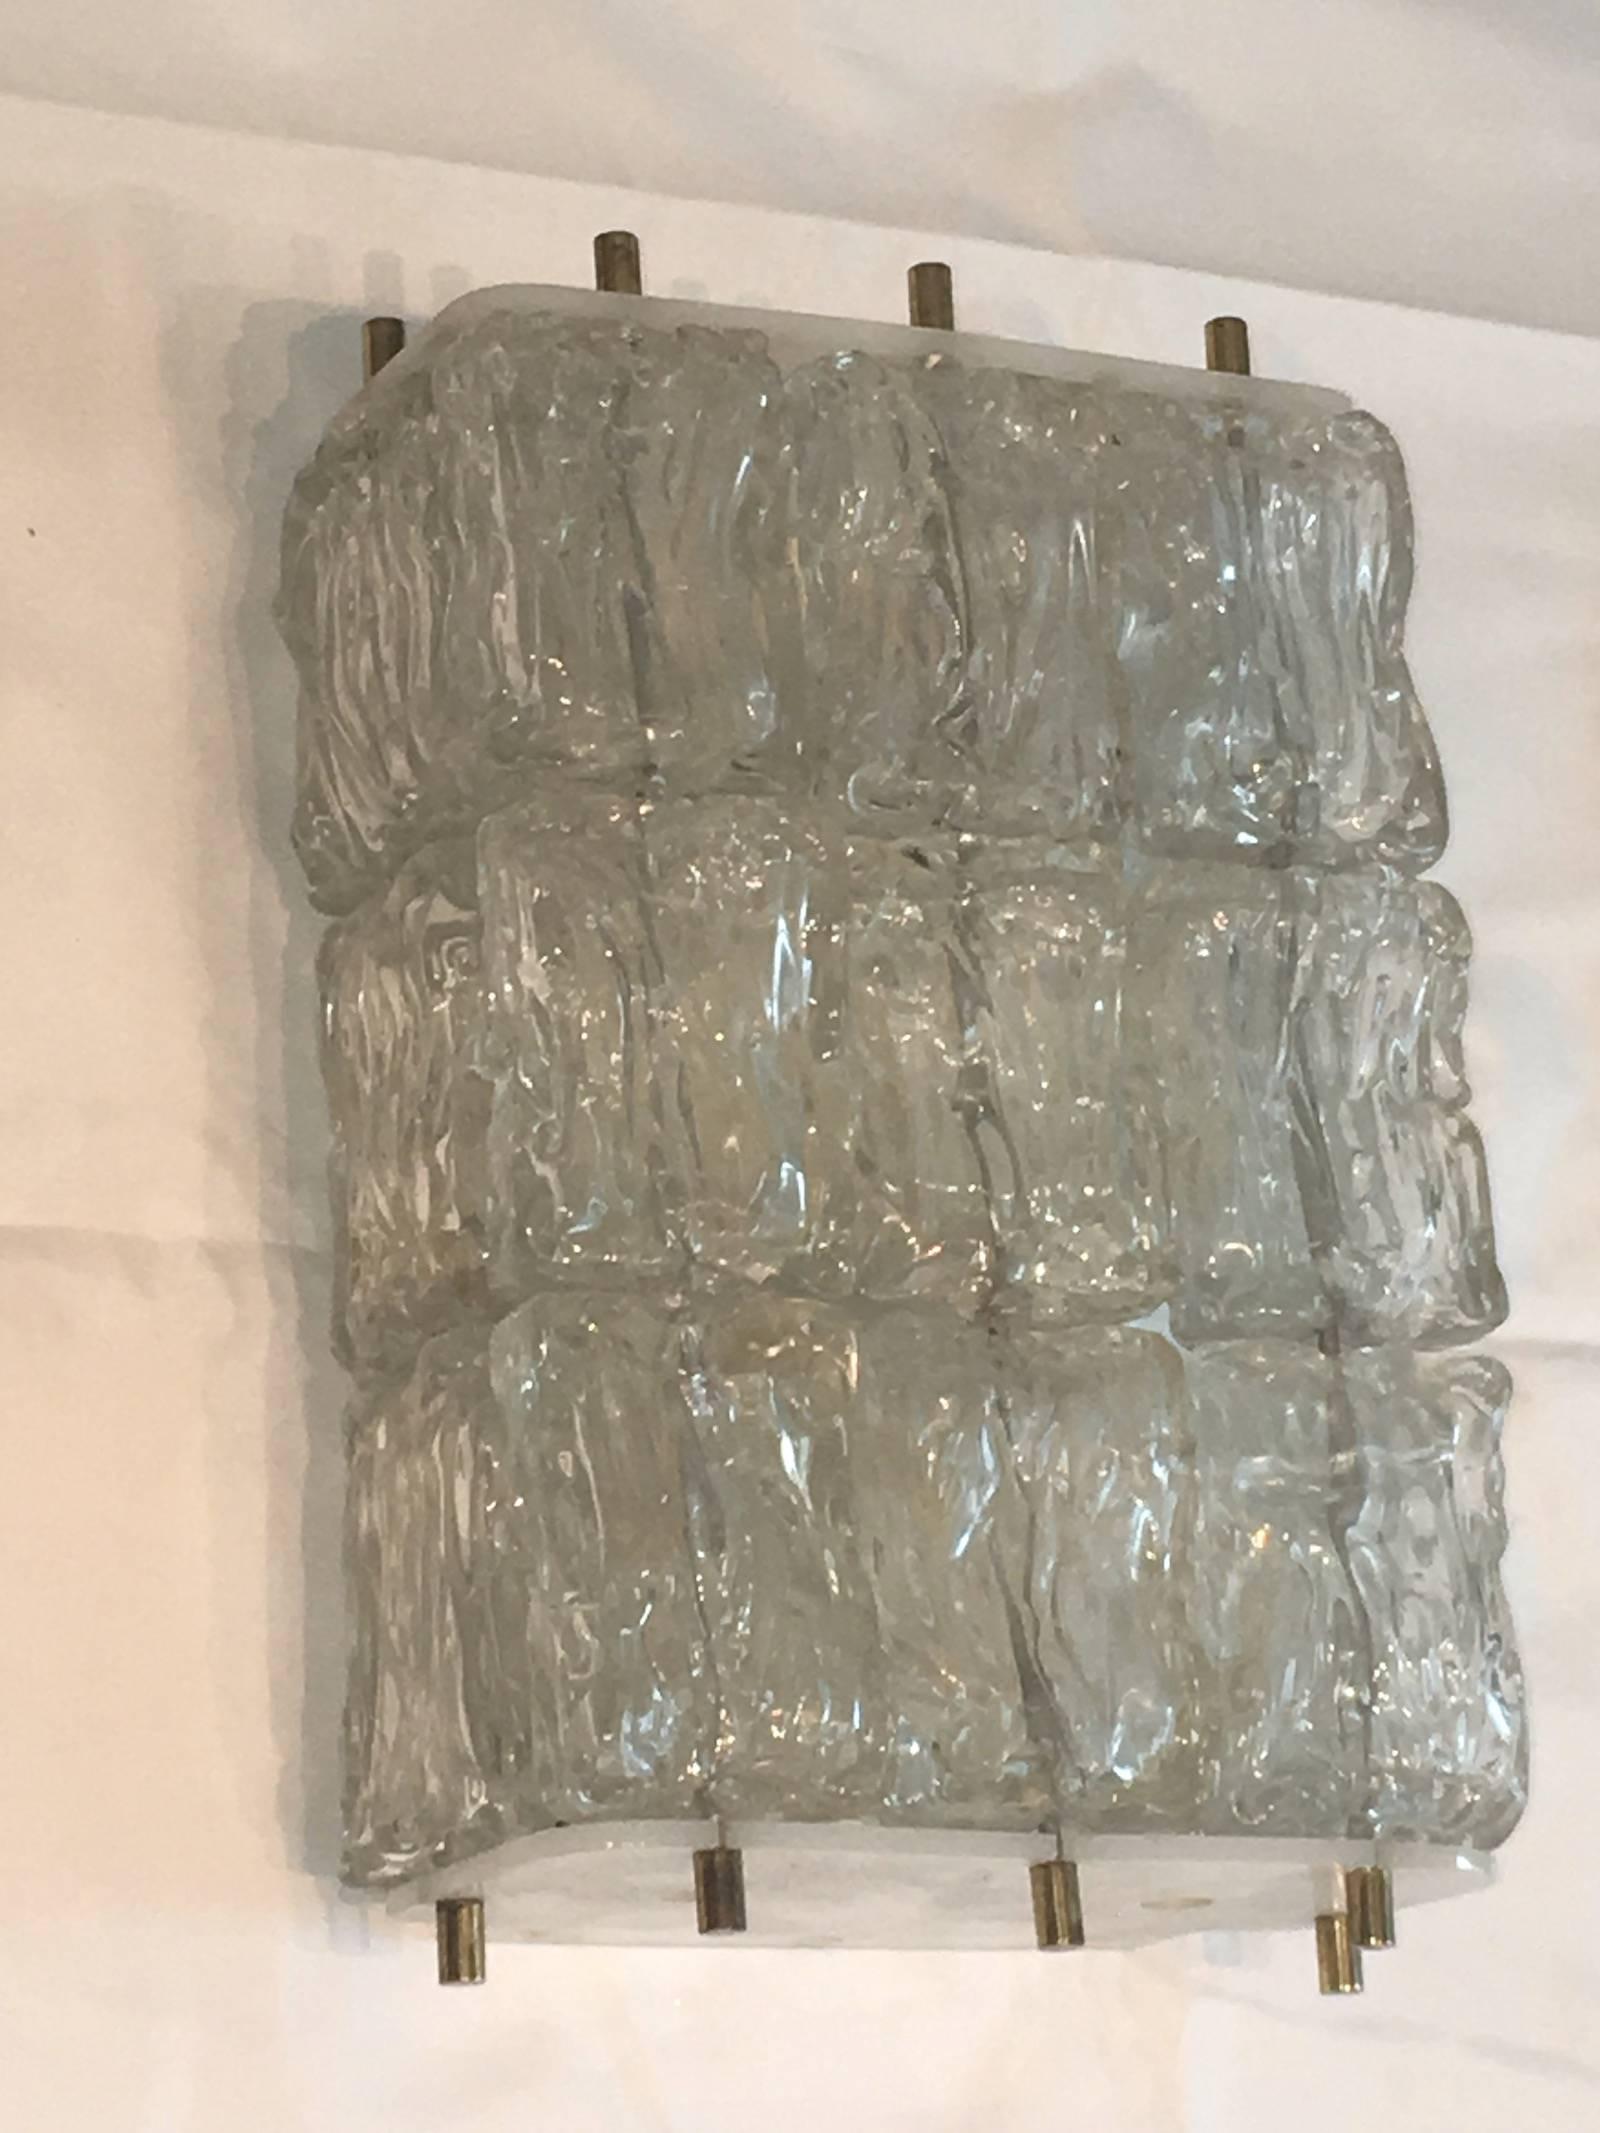 A beautiful wall sconces, produced circa 1970s in the style of Venini, with rows of textured glass ice blocks as shades, each stack of three affixed to plastic mounts by brass heads, surrounding four sockets, against an enameled back plate. Overall